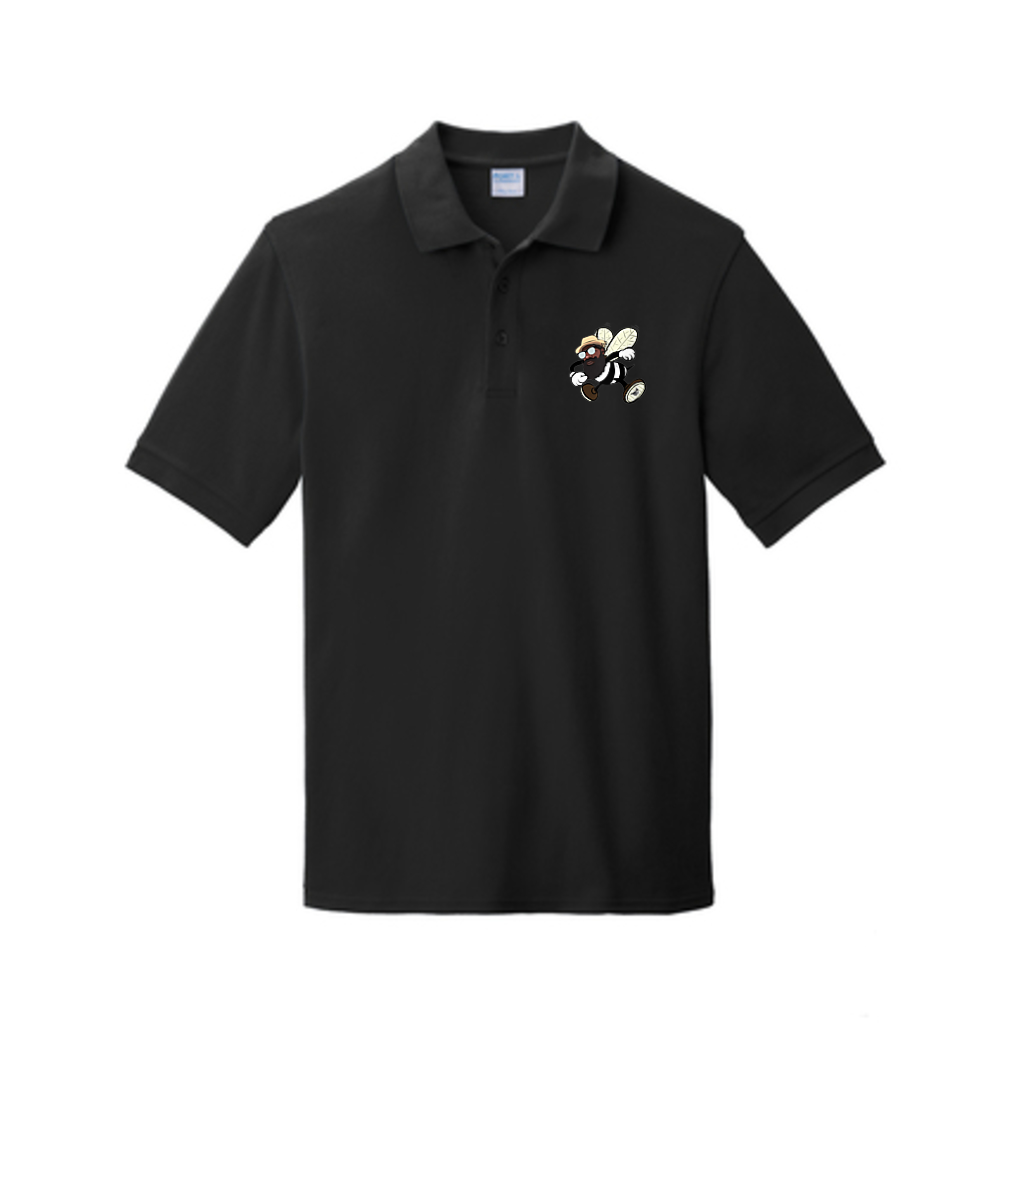 Be Who you Bee! Embroidered Men's Combed Ring Spun Pique Polo or Similar